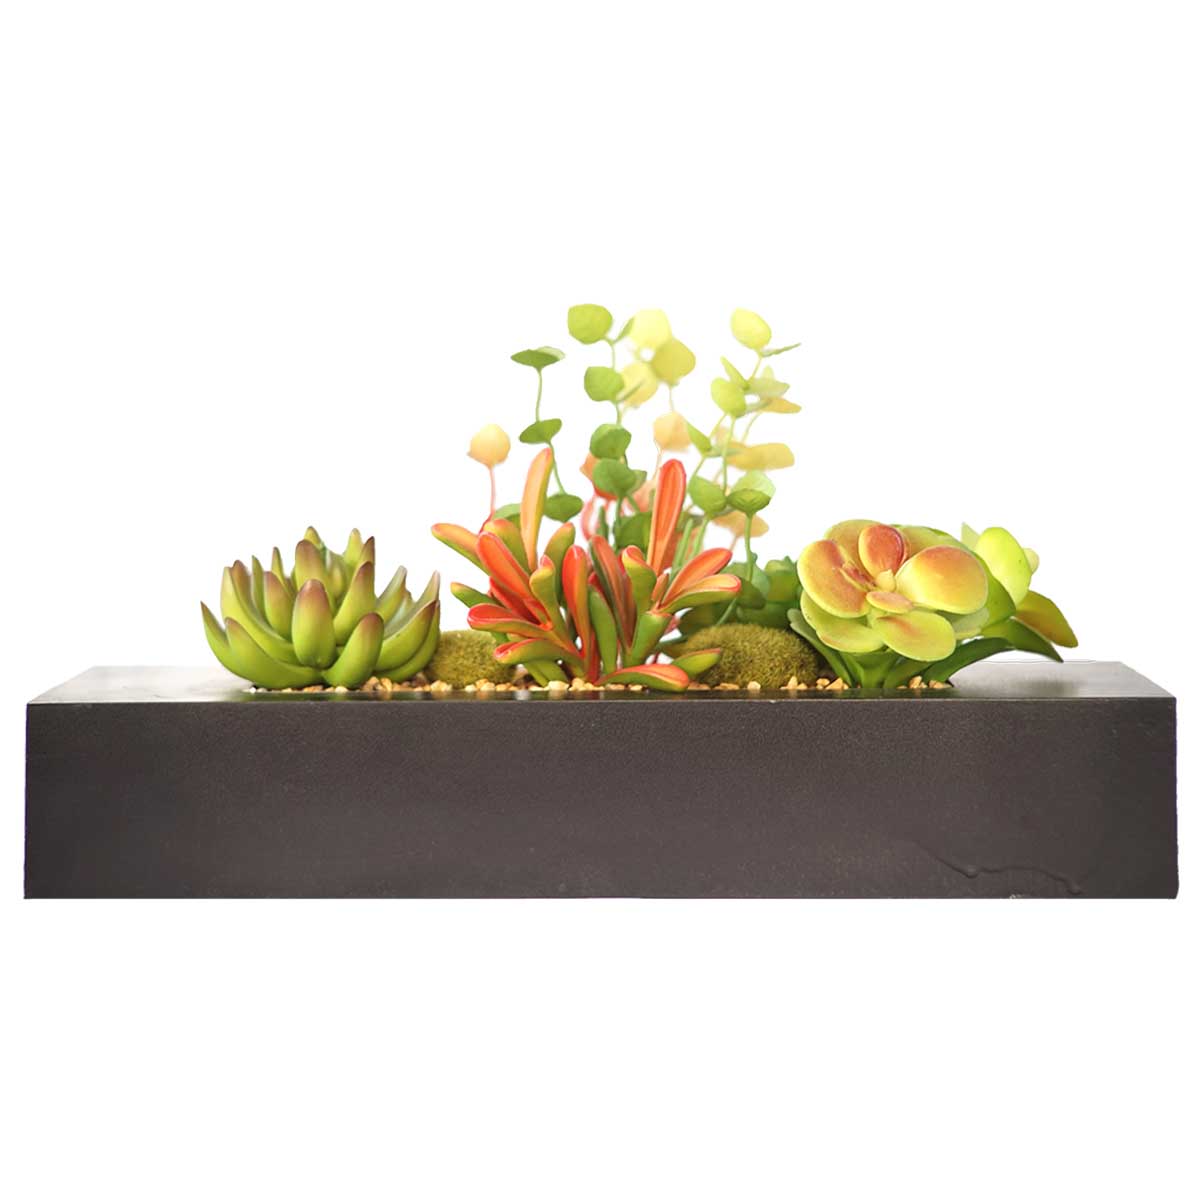 Vha102474 Succulents In Wooden Planter